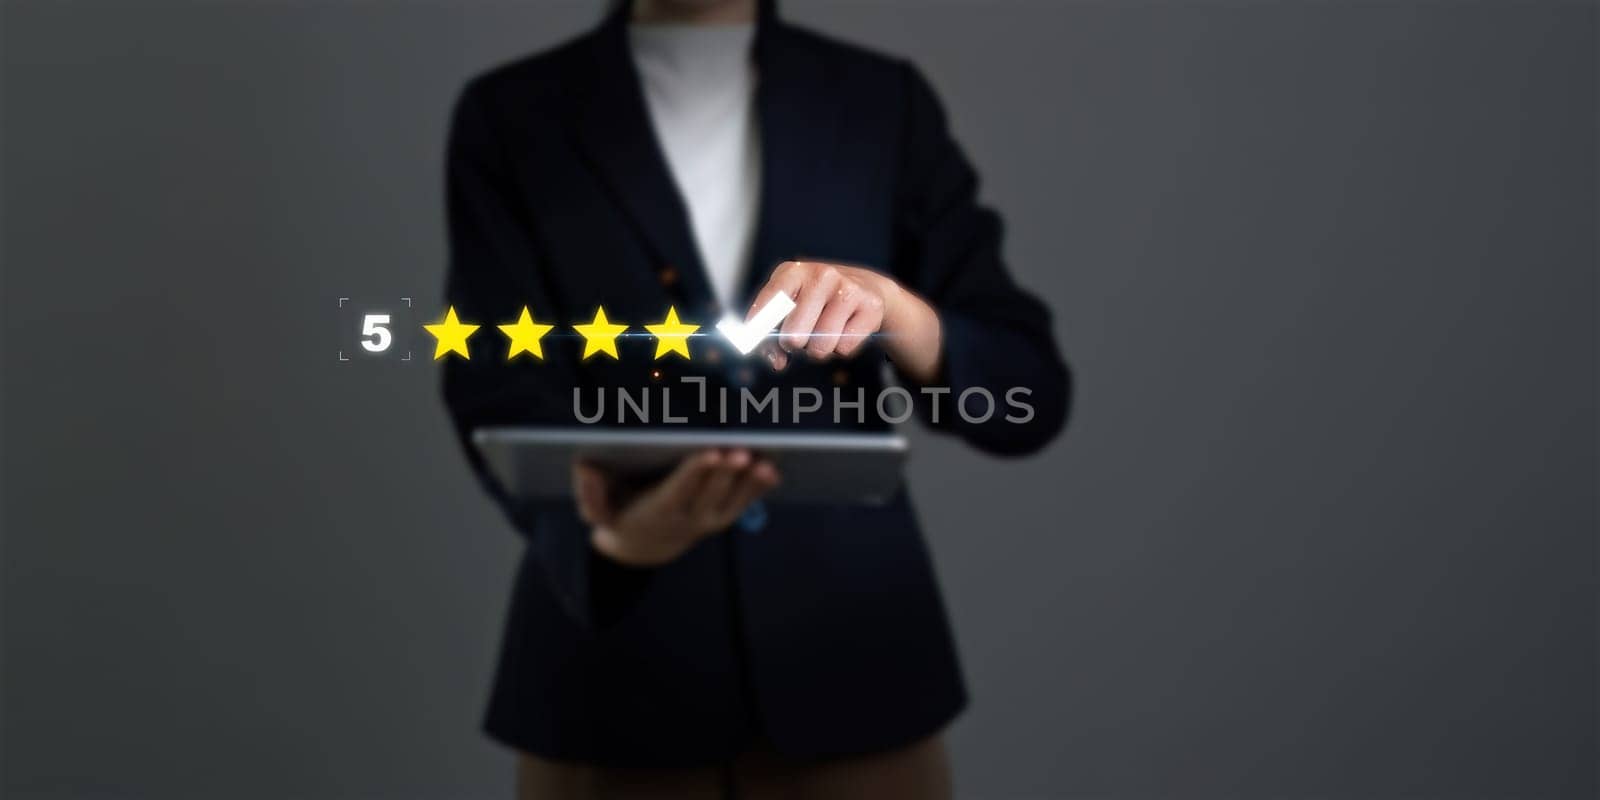 A woman is holding a tablet and pointing to a 5 star rating. Concept of accomplishment and satisfaction, as the woman is giving a thumbs up to the 5 star rating